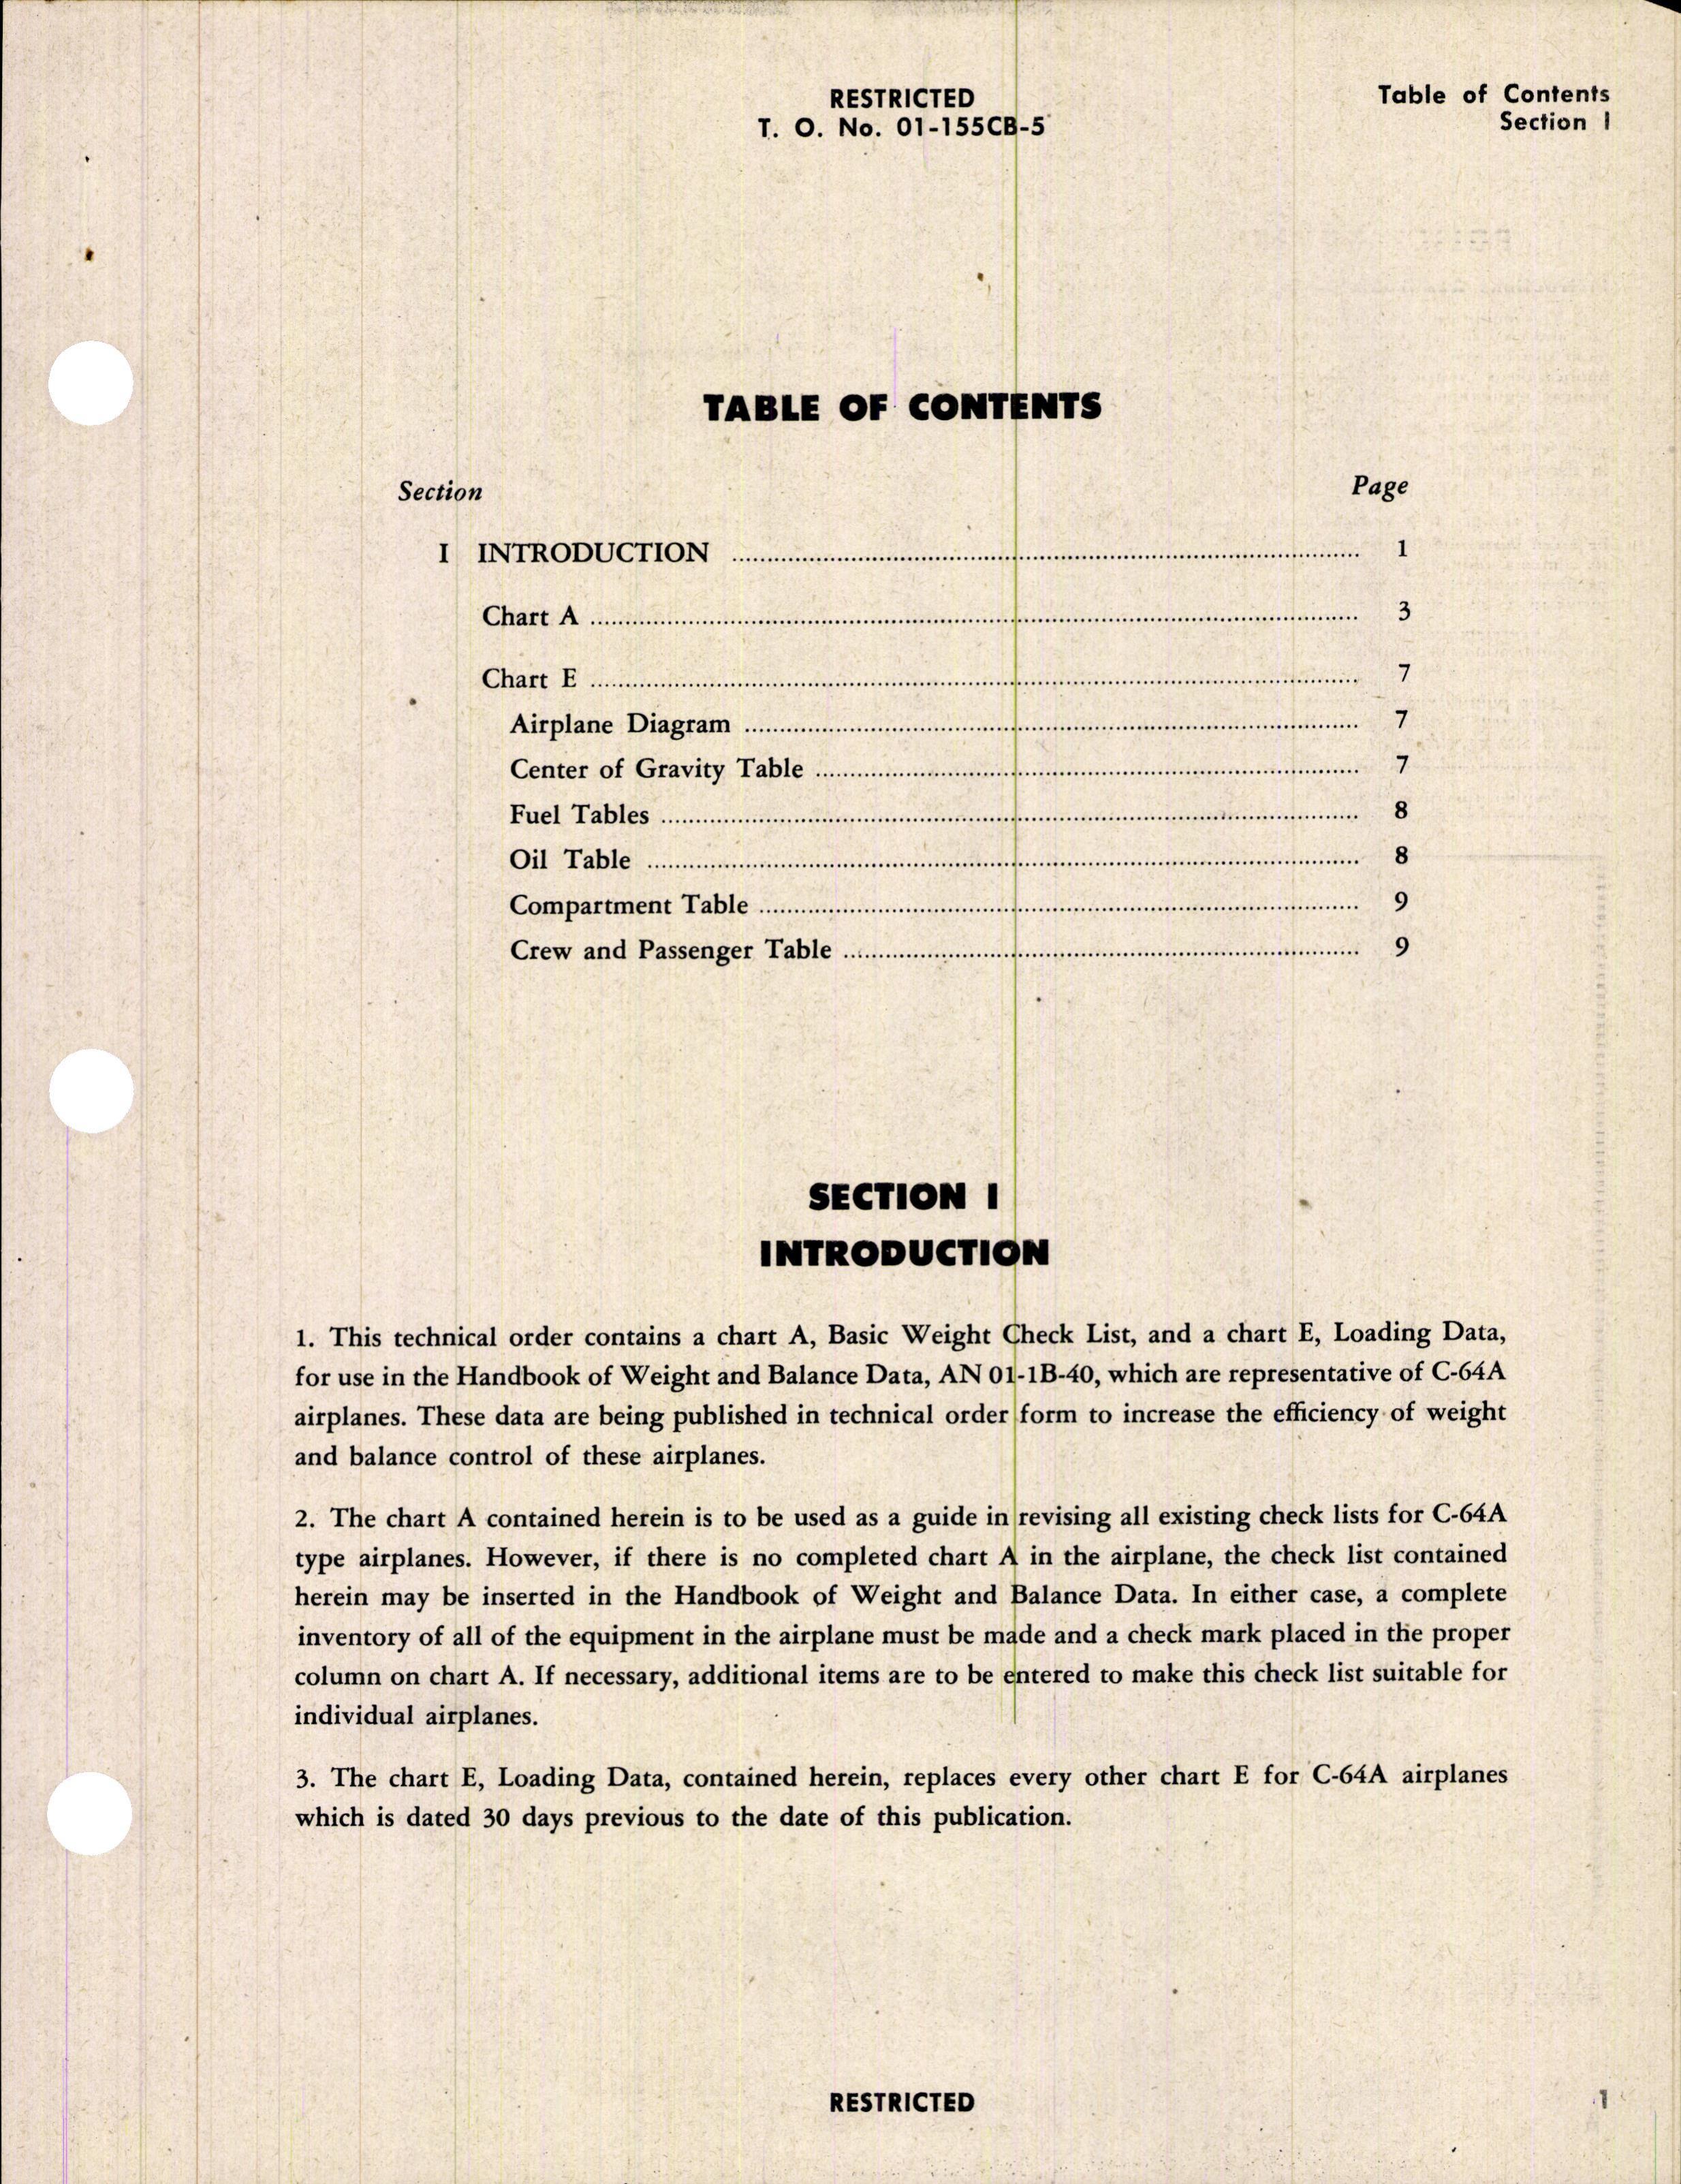 Sample page 3 from AirCorps Library document: Basic Weight Check List and Loading Data for Army Model C-64A